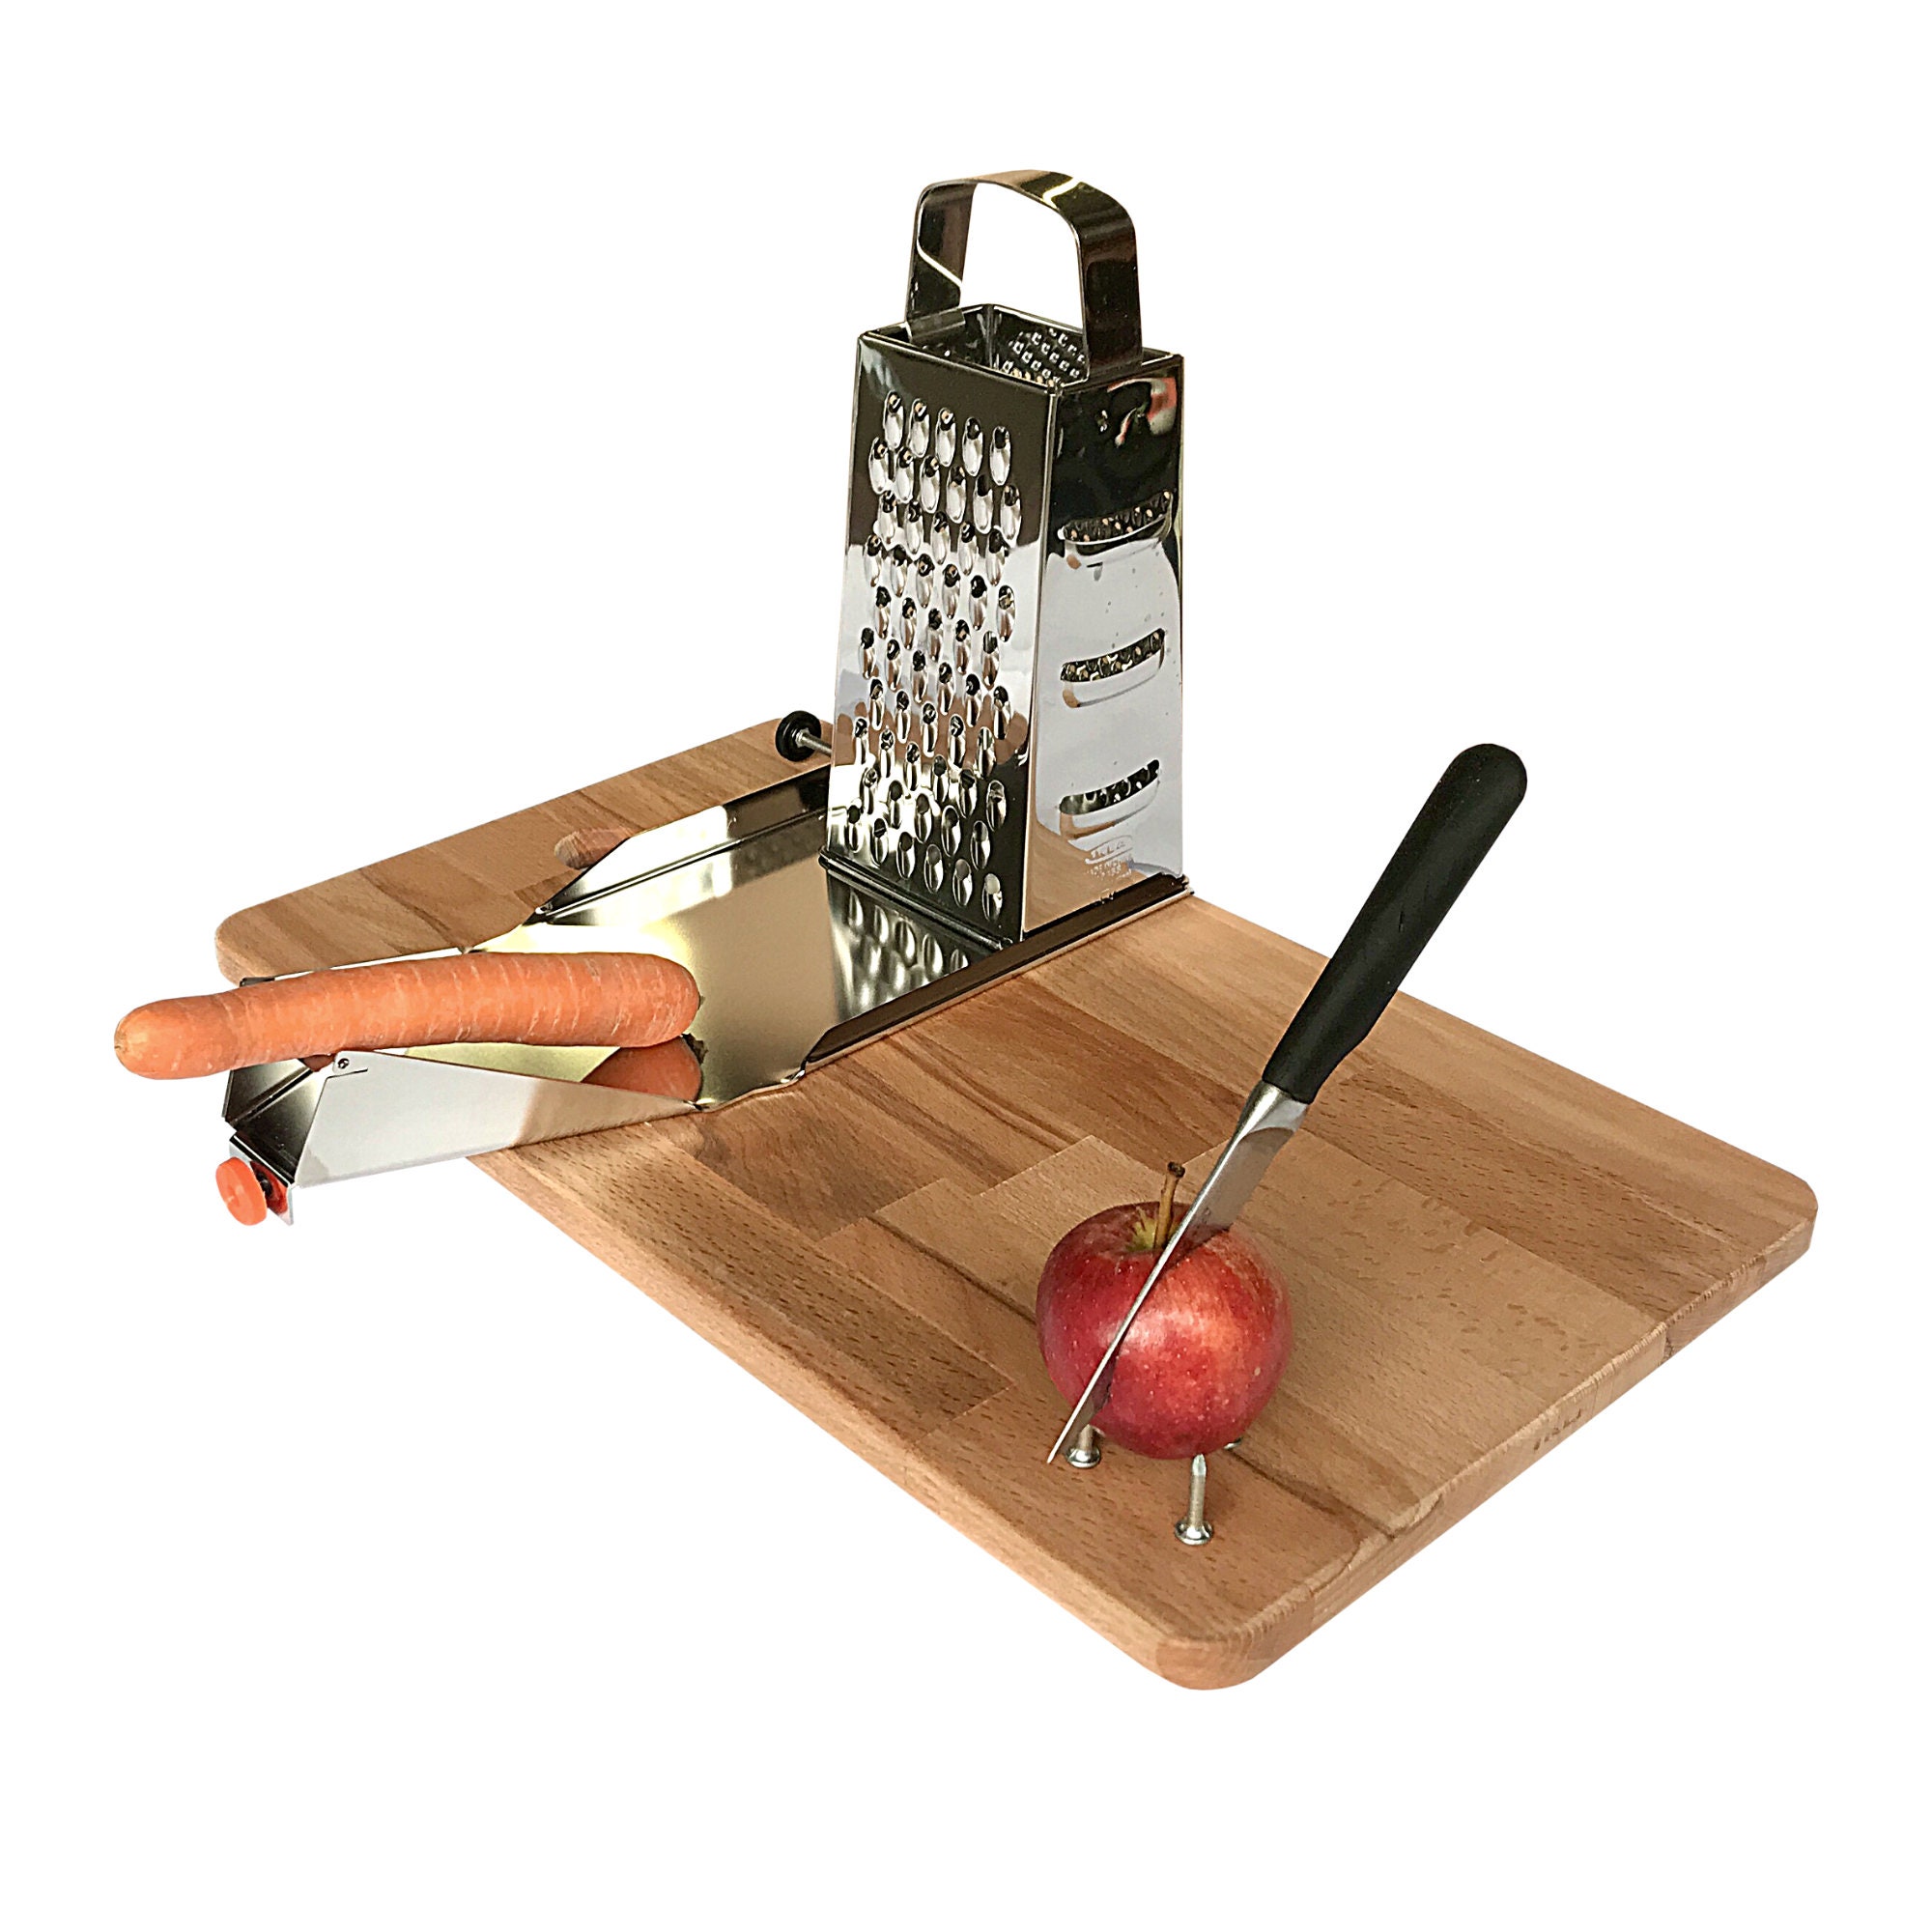 Single-Handed Cutting Board Is A Great Solution For People With